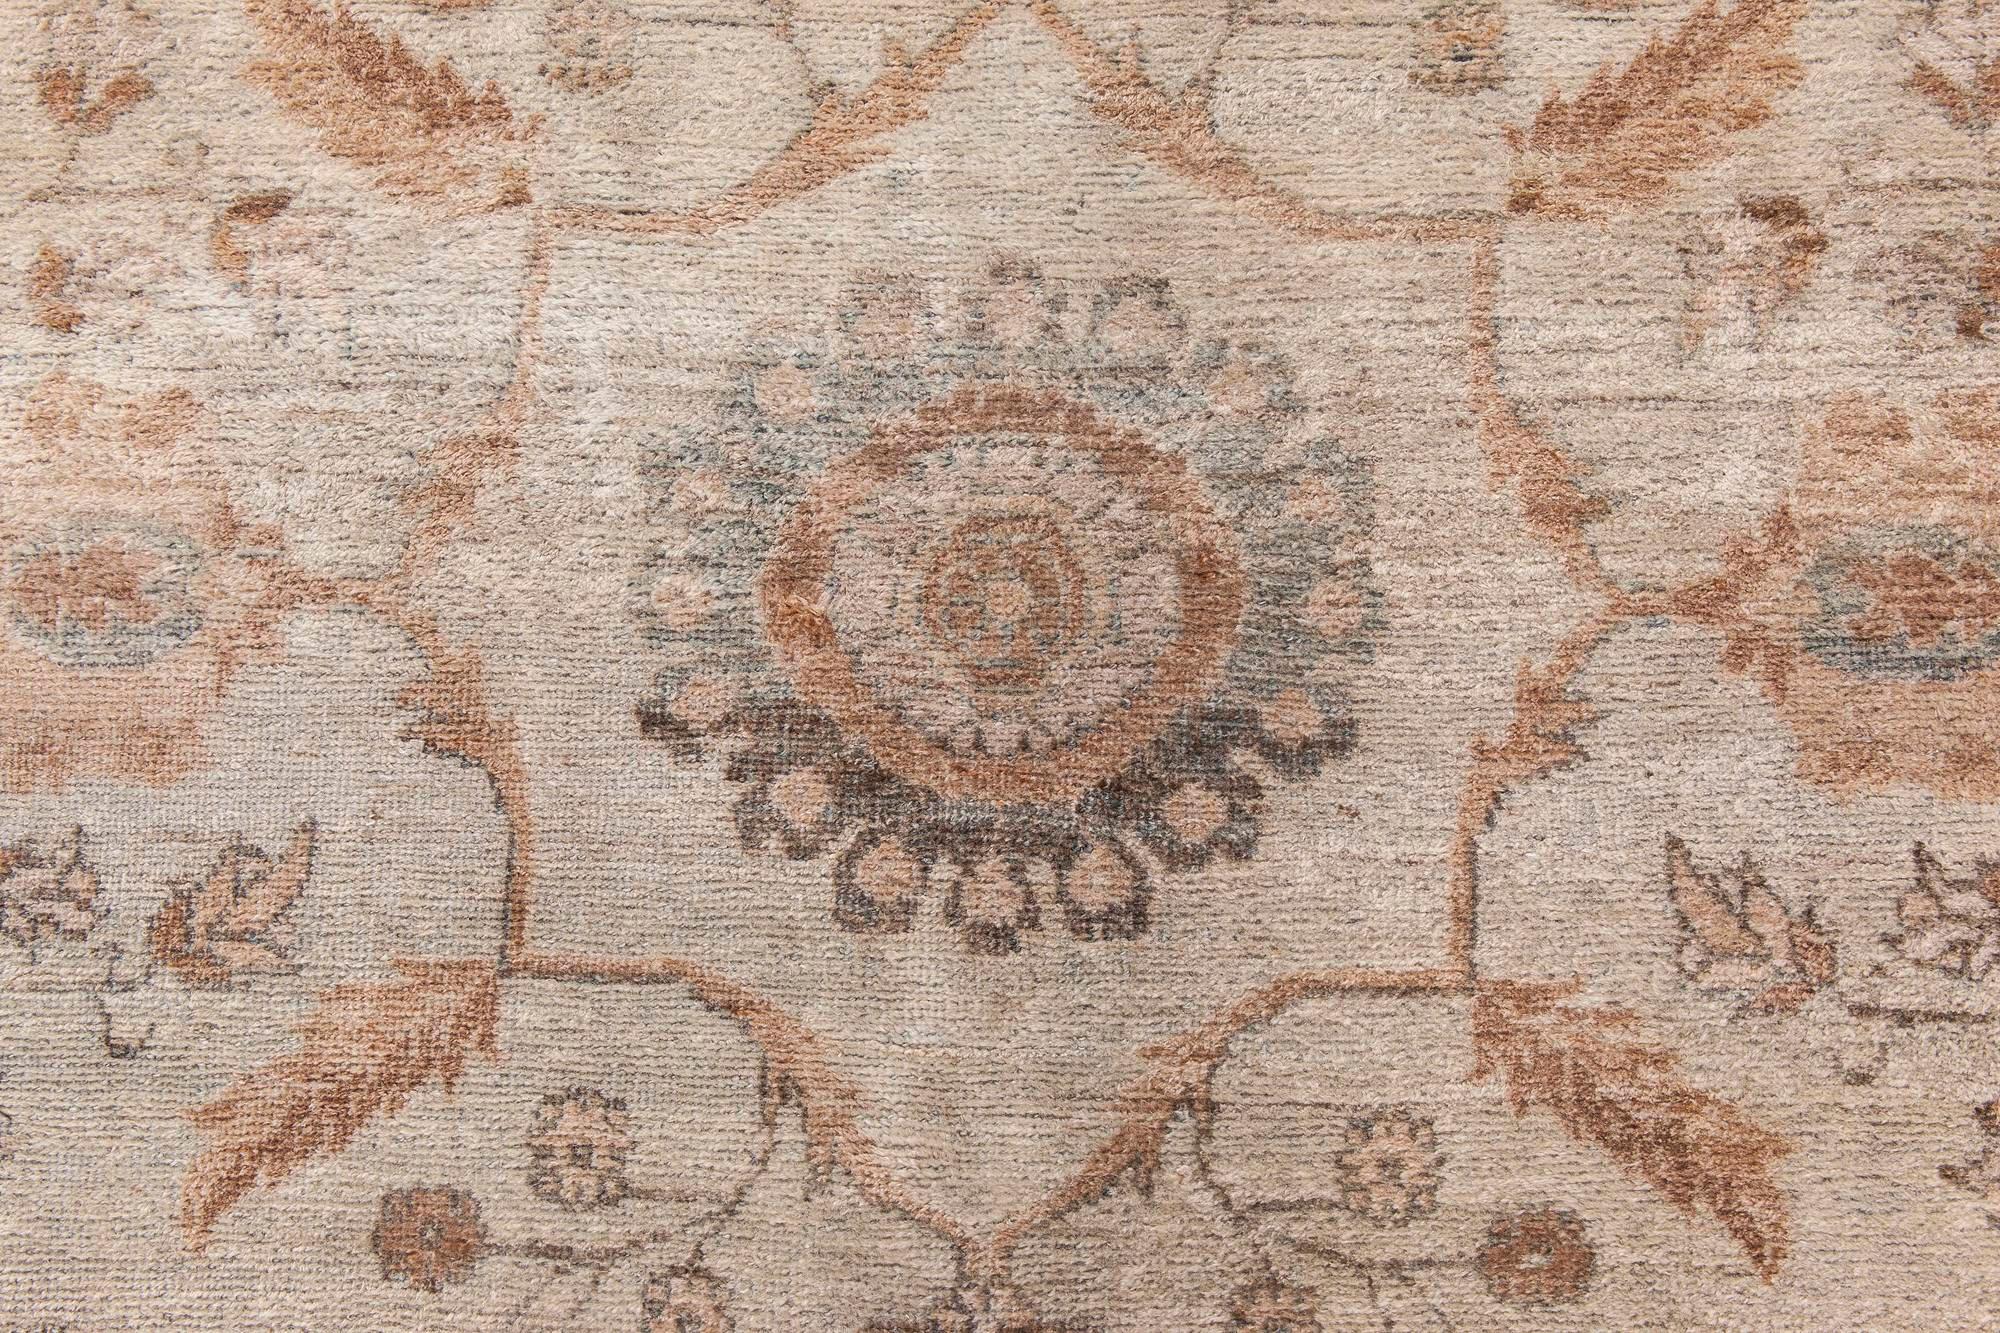 Antique North Indian Handmade Wool Rug
Size: 11'2